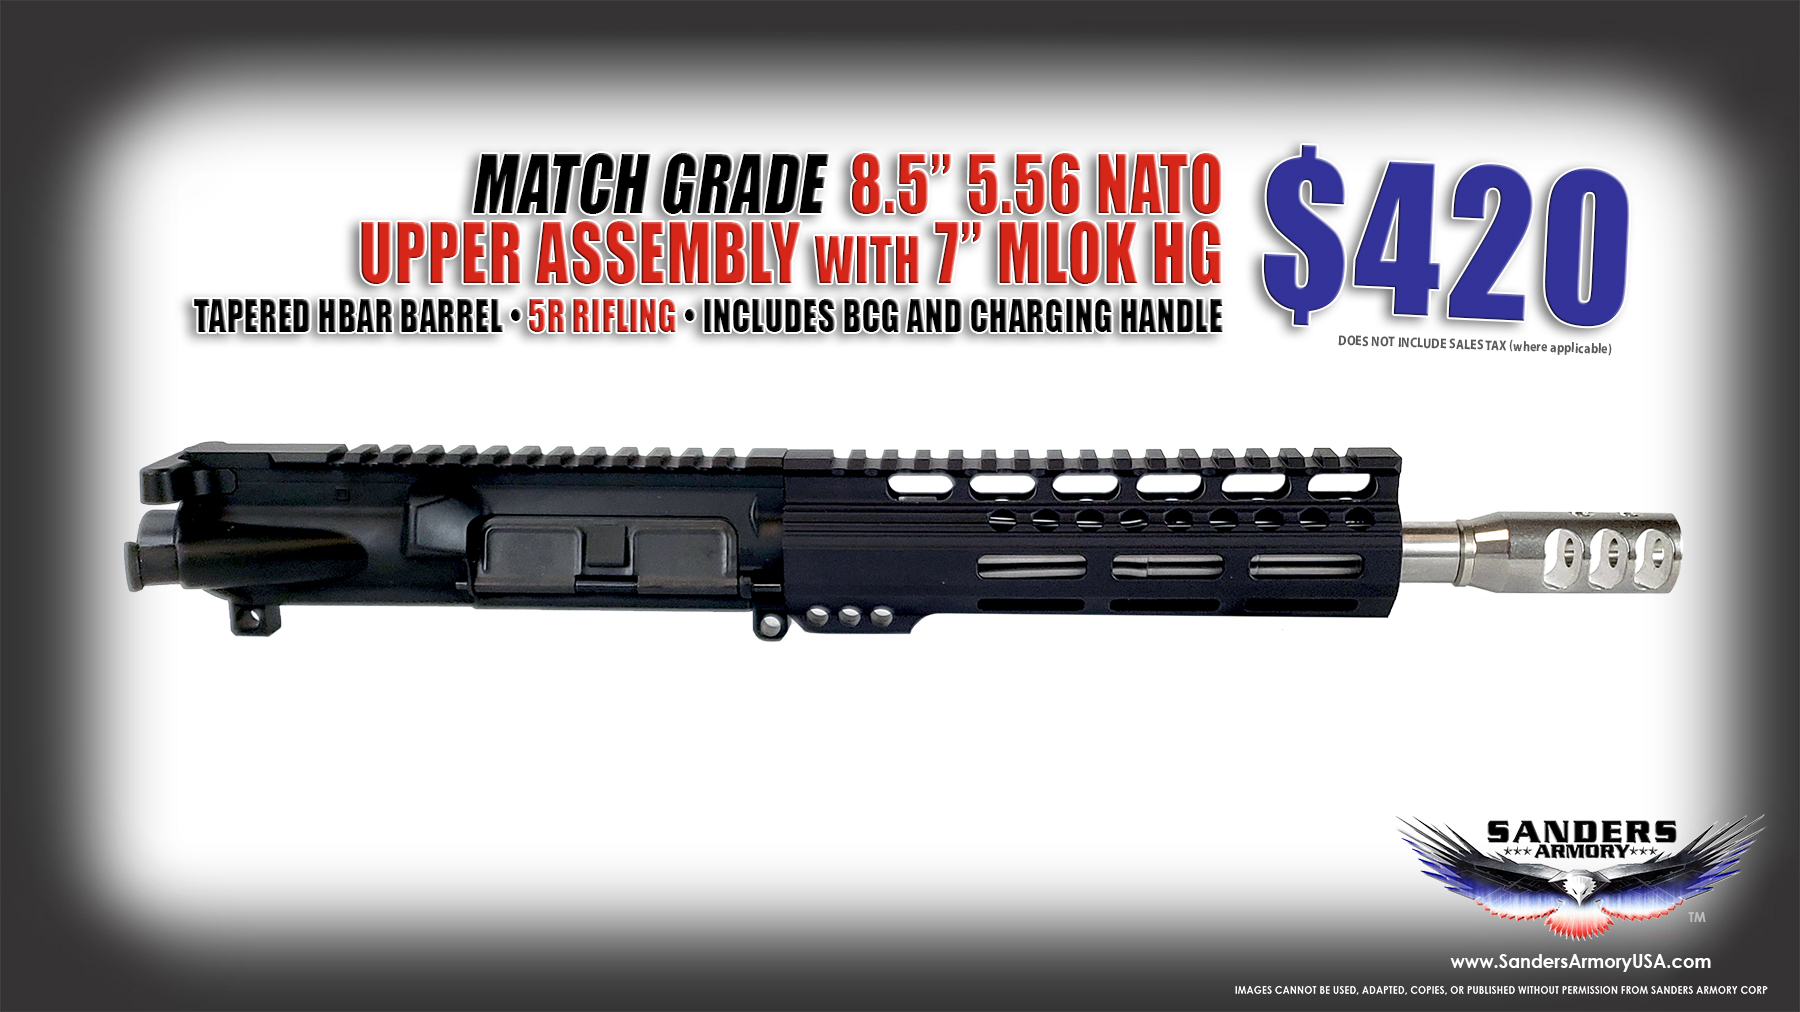 Sanders Armory 85 556 NATO TFC Forged Upper Assembly